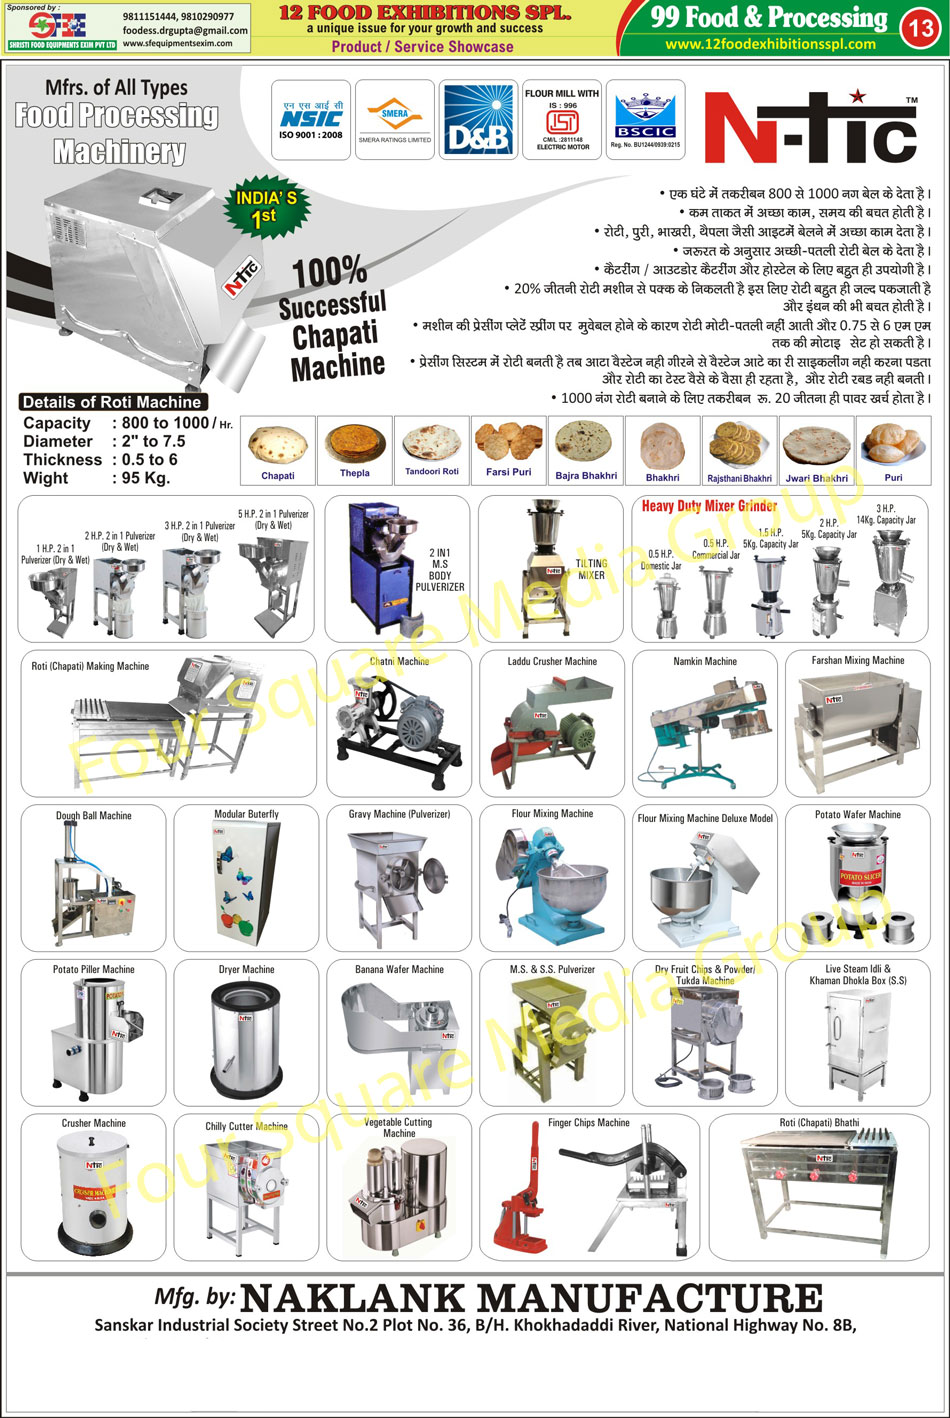 Food Processing Machines, Mixer Grinders, Chapati Machines, Roti Machines, Domestic Flour Mills, Two In One Pulverizer For Food, Gravy Machines, Flour Mixing Machines, Farshan Machines, Vegetable Cutting Machines, Masala Mixing Machines, Spice Mixing Machines, Potato Peeling Machines, Onion Cutting Machines, Potato Wafer Machines, Steam Idli Machines, Dryer Machines for Food, Chatni Machines, Laddu Crusher Machines, Namkeen Machines, Dough Ball Machines, Hand Press Roti Making Machines, Hand Press Chapati Making Machines, Banana Wafer Machines, SS Pulverizers, Stainless Steel Pulverizers, MS Pulverizers, Dry Fruit Chips Machines, Dry Fruit Powder Machines, Dry Fruit Tukda Machines, Stainless Steel Khaman Dhokla Boxes, Crusher Machine For Food, Chilly Cutter Machines, Chilli Cutter Machines, Finger Chips Machines, Roti Bhathi, Chapati Bhathi, Chapati Making Machines, Roti Making Machines, Tilting Mixer, Potato Peeler Machines